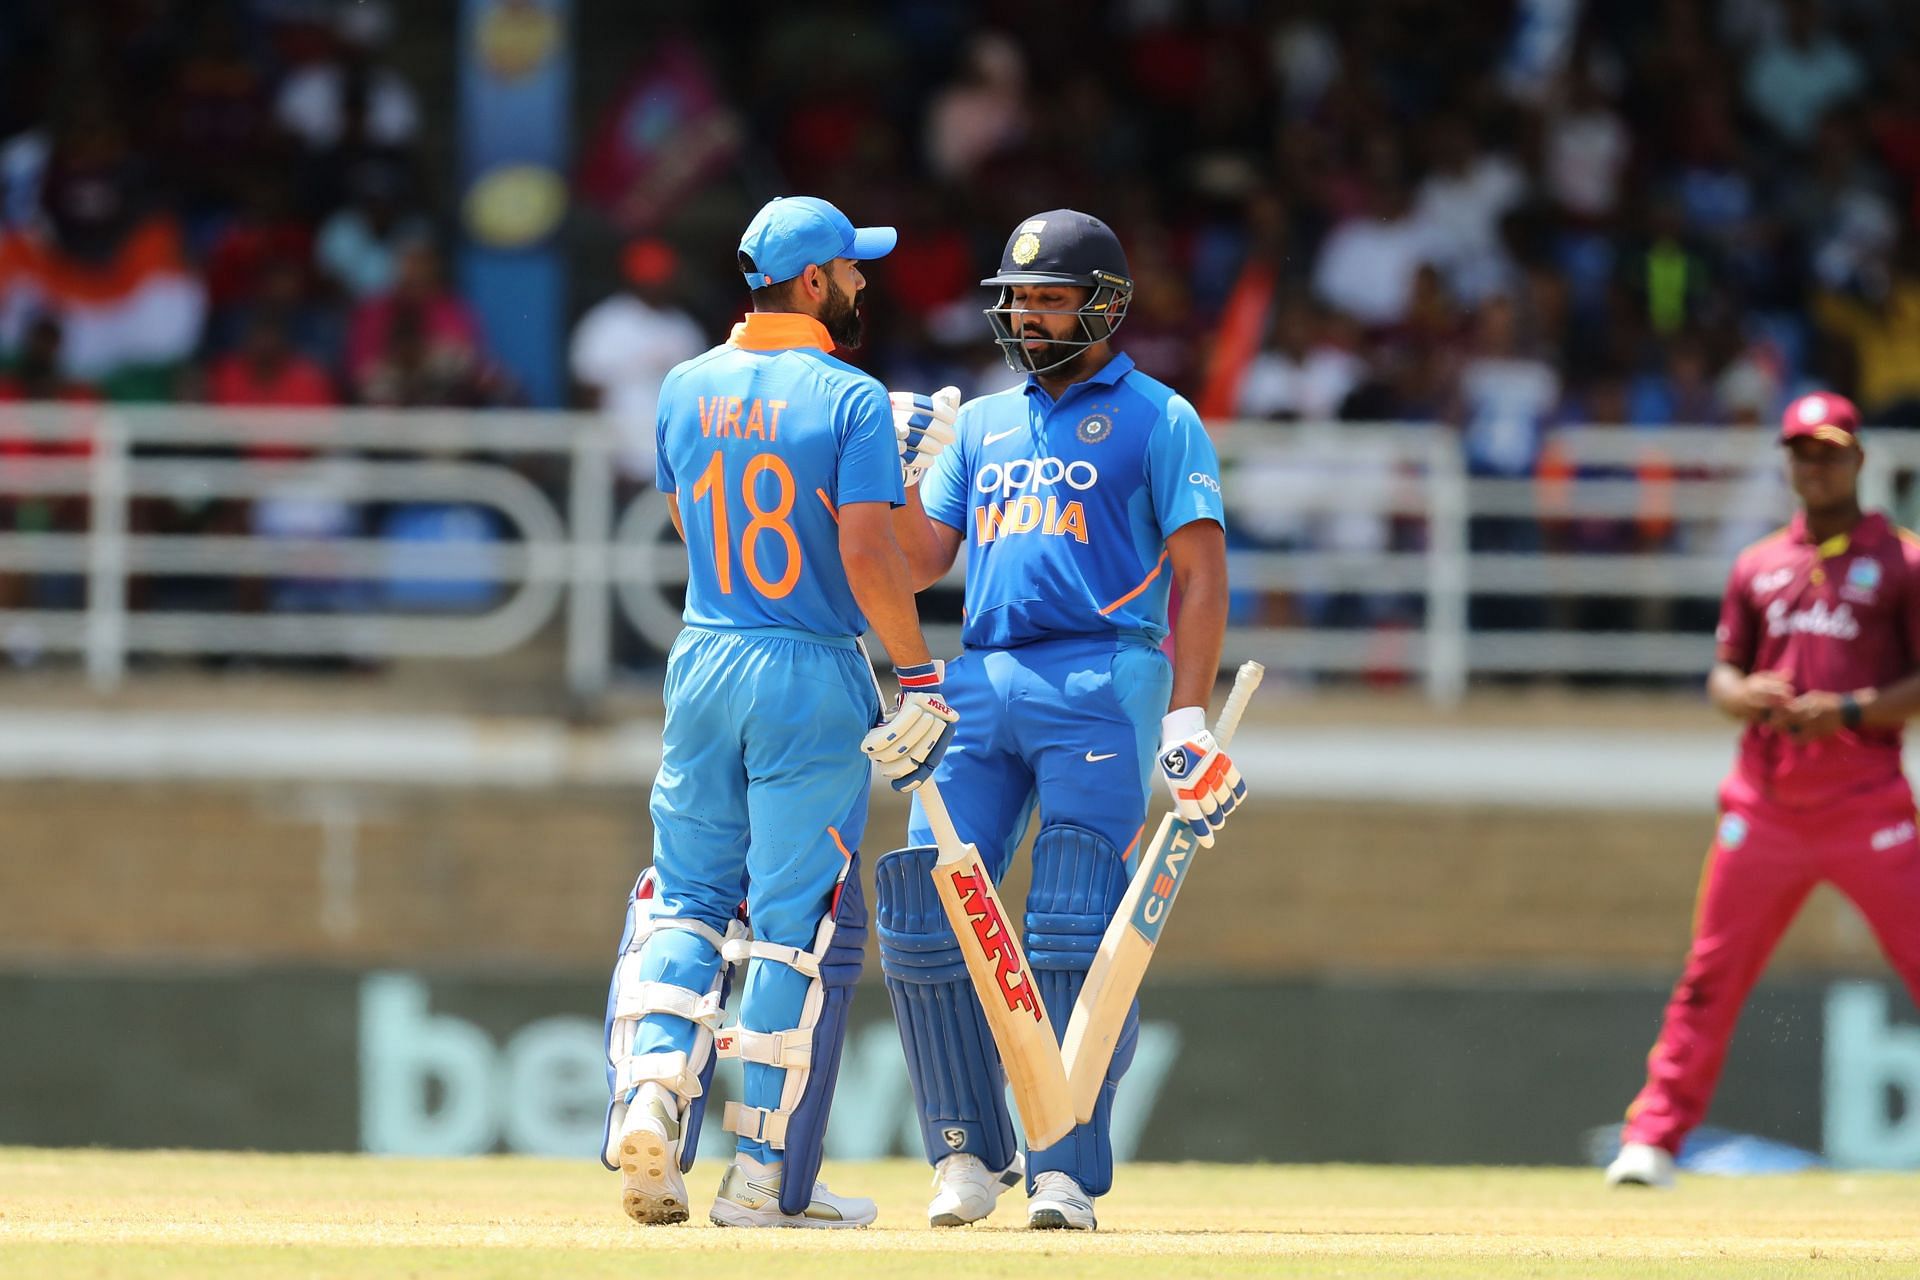 Virat Kohli and Rohit Sharma were rested for the second ODI.